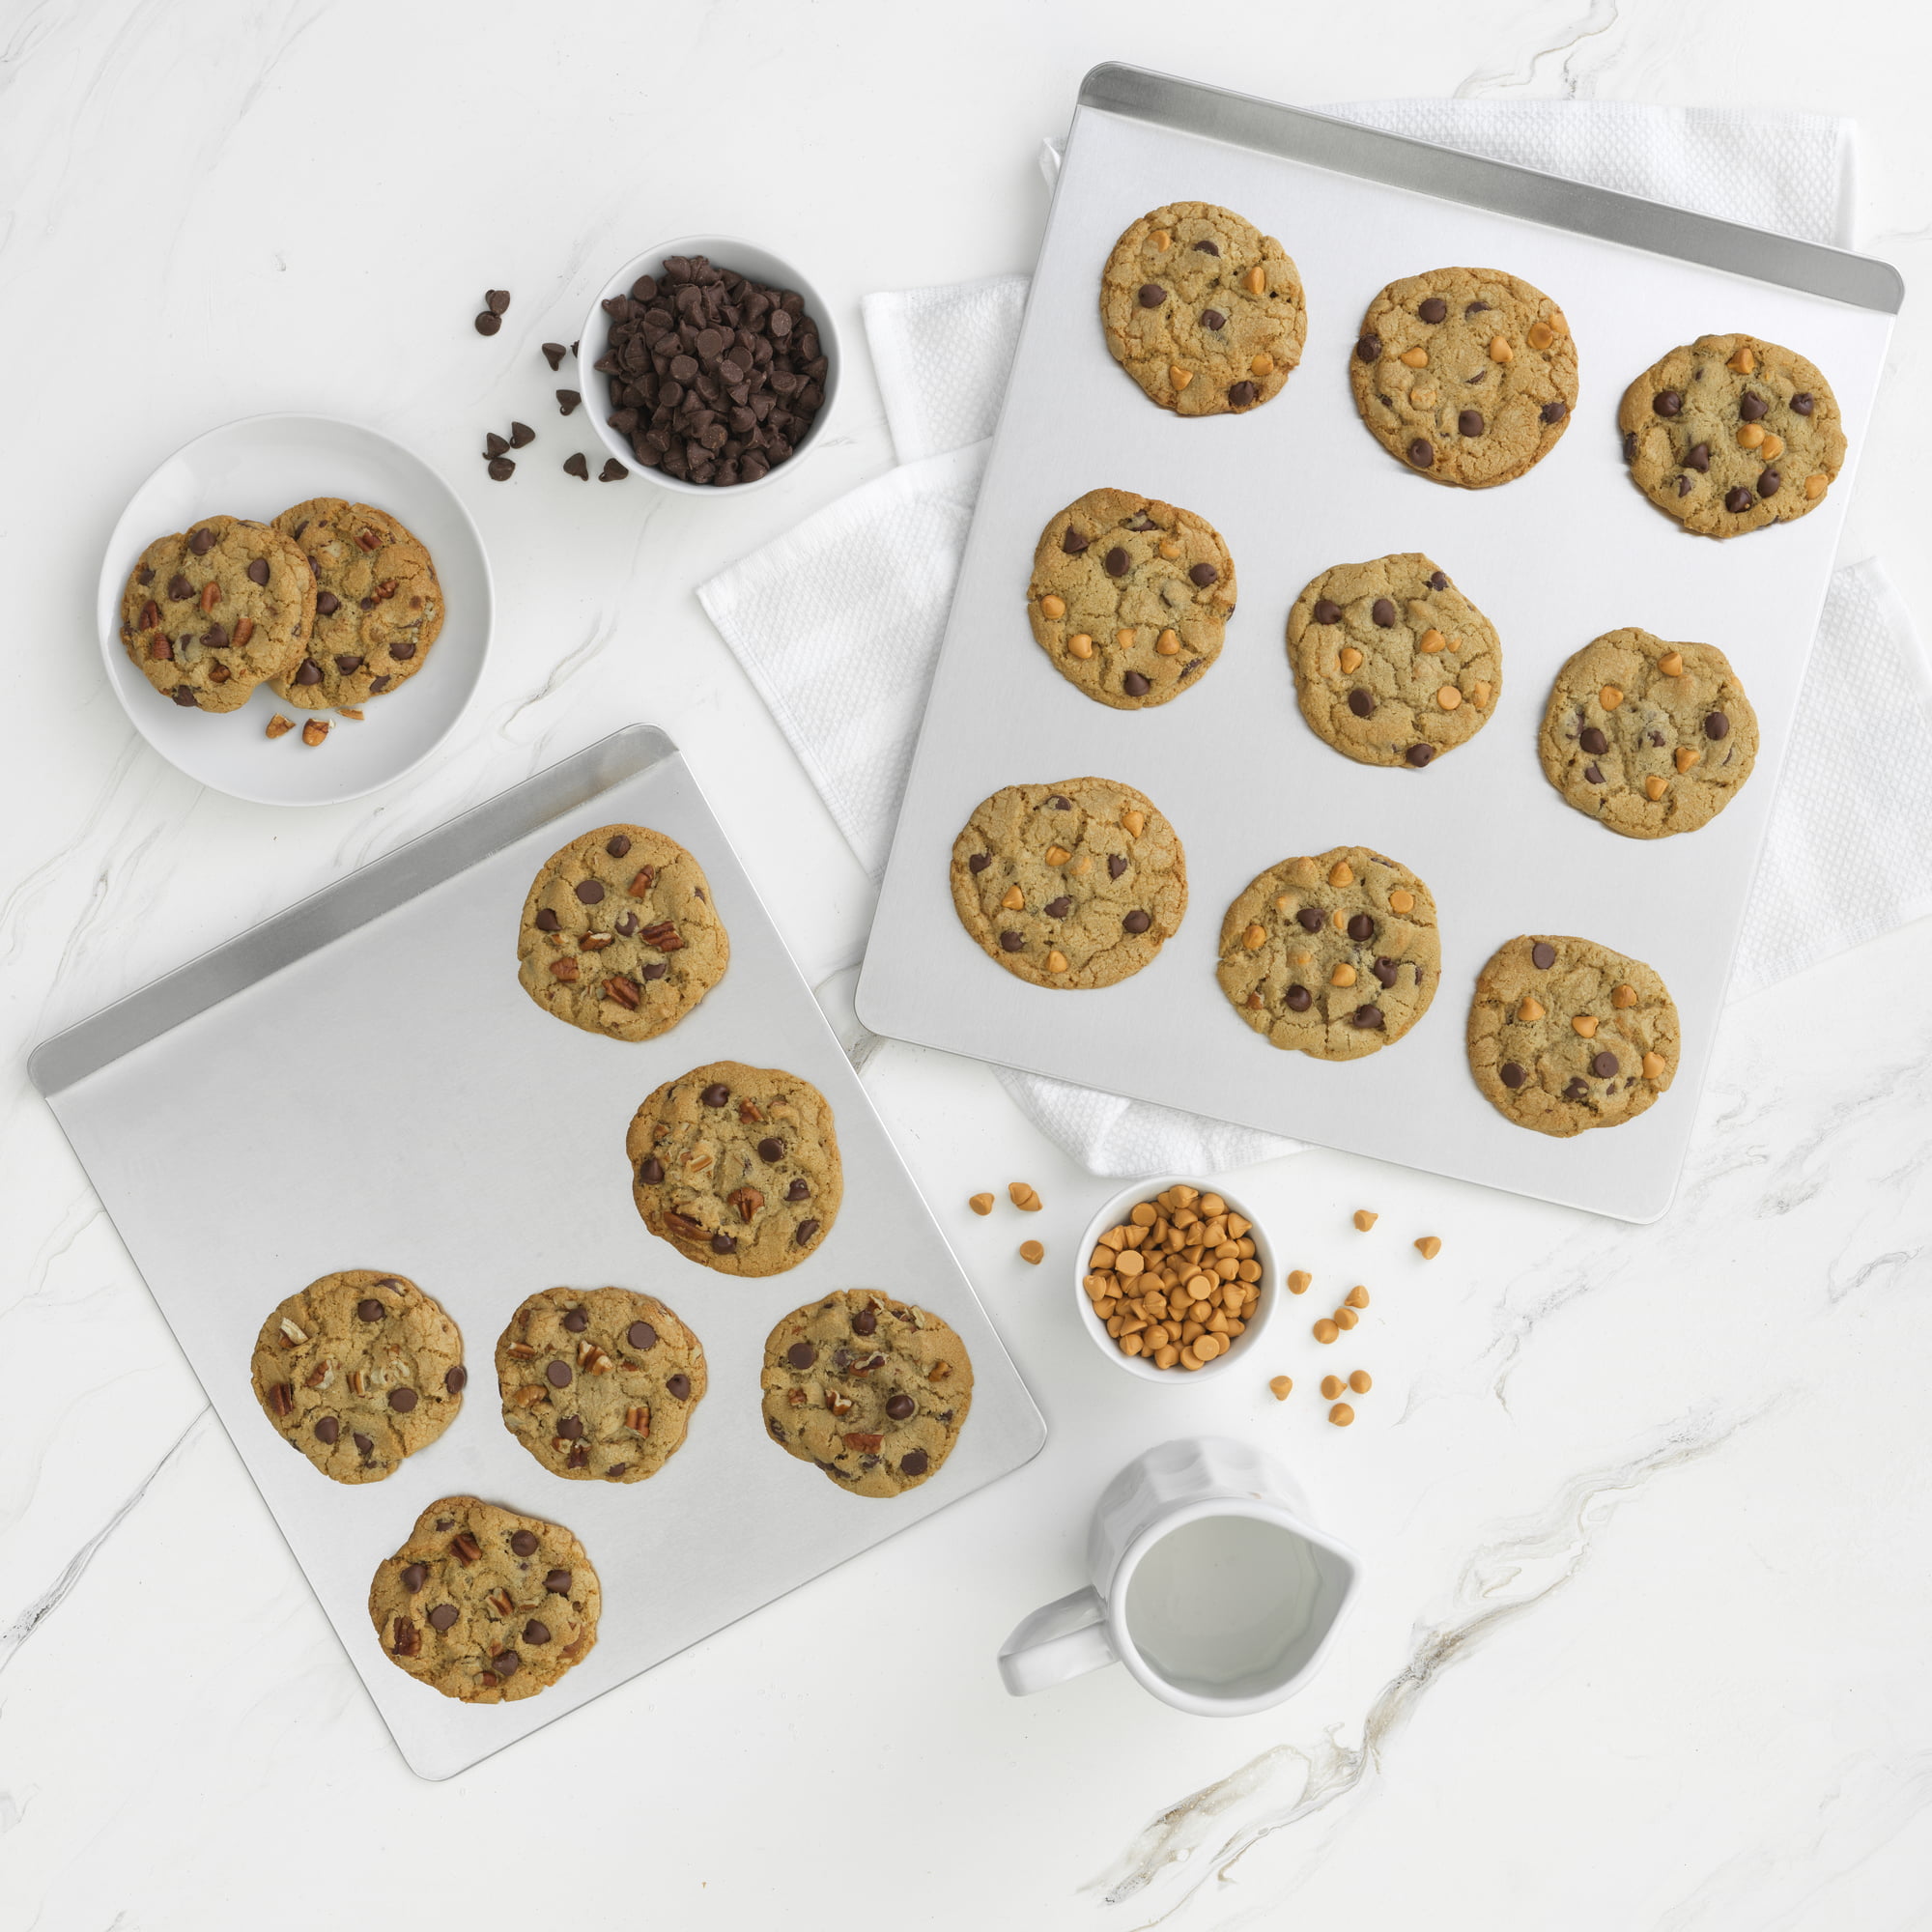 T-fal Airbake Natural Cookie Sheet, 3-piece Variety Set (16 X 14, 14 X 12,  14 X 9.5 Inches) & Reviews